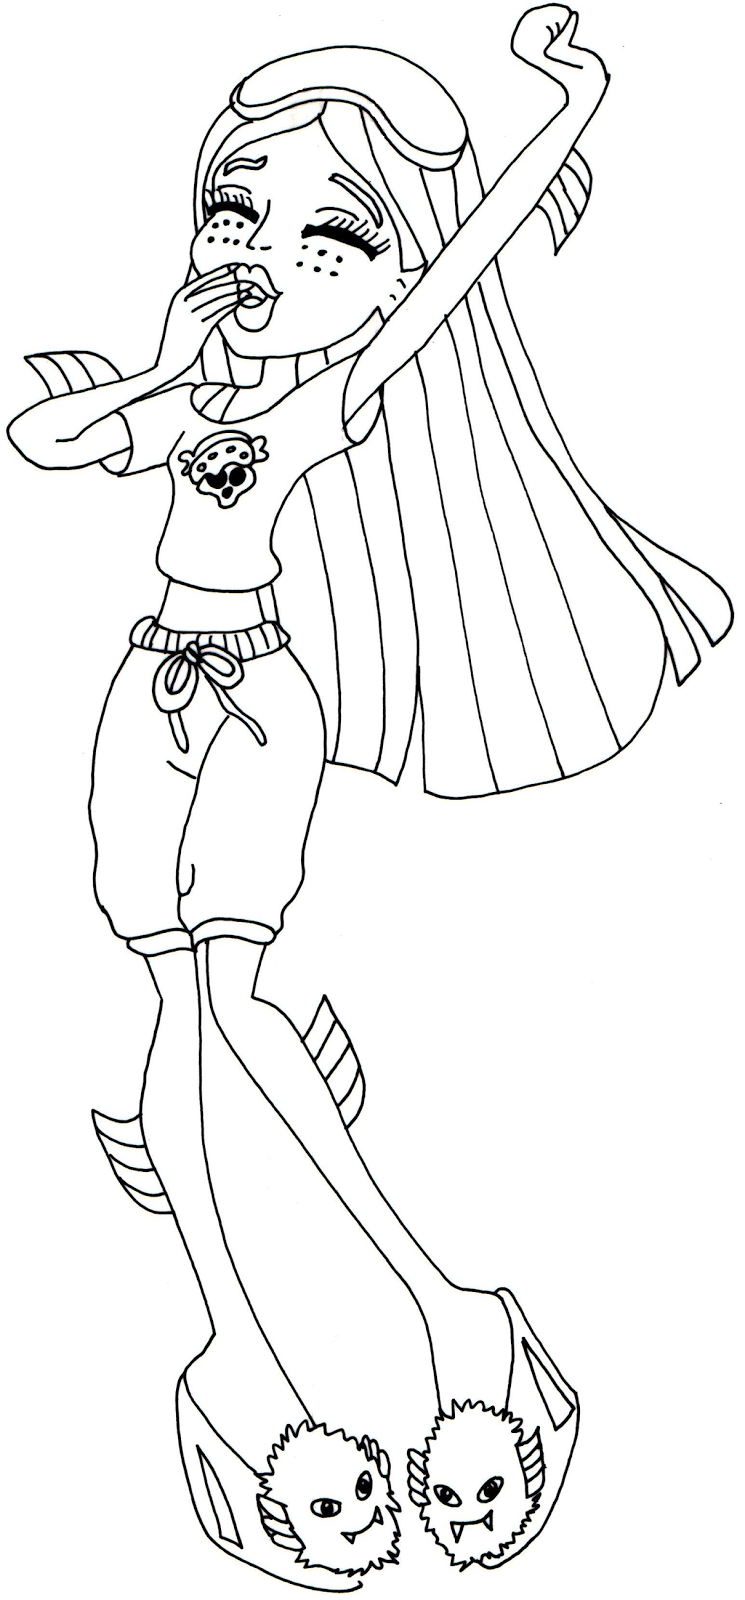 Free printable monster high coloring page for Lagoona Blue in her dead tired outfit